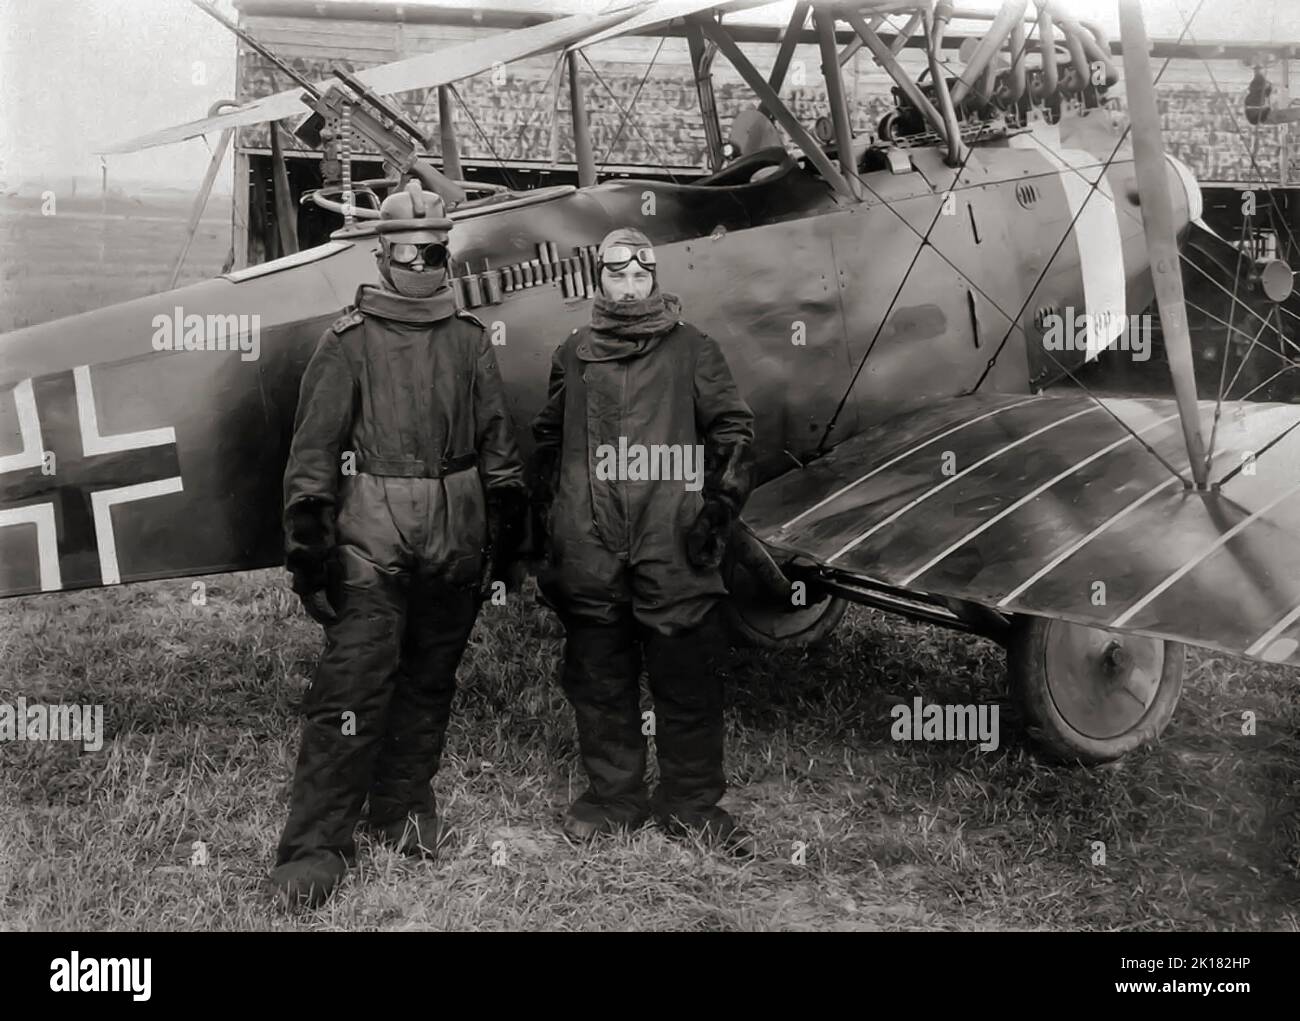 German pilot Richard Scholl and his co-pilot Lieutenant Anderer, in flight gear beside their Hannover CL.II biplane in 1918. The Hannover CL.II was an escort fighter, produced in Germany during World War I, designed in response to a 1917 requirement fora machine to protect reconnaissance aircraft over enemy territory. Stock Photo